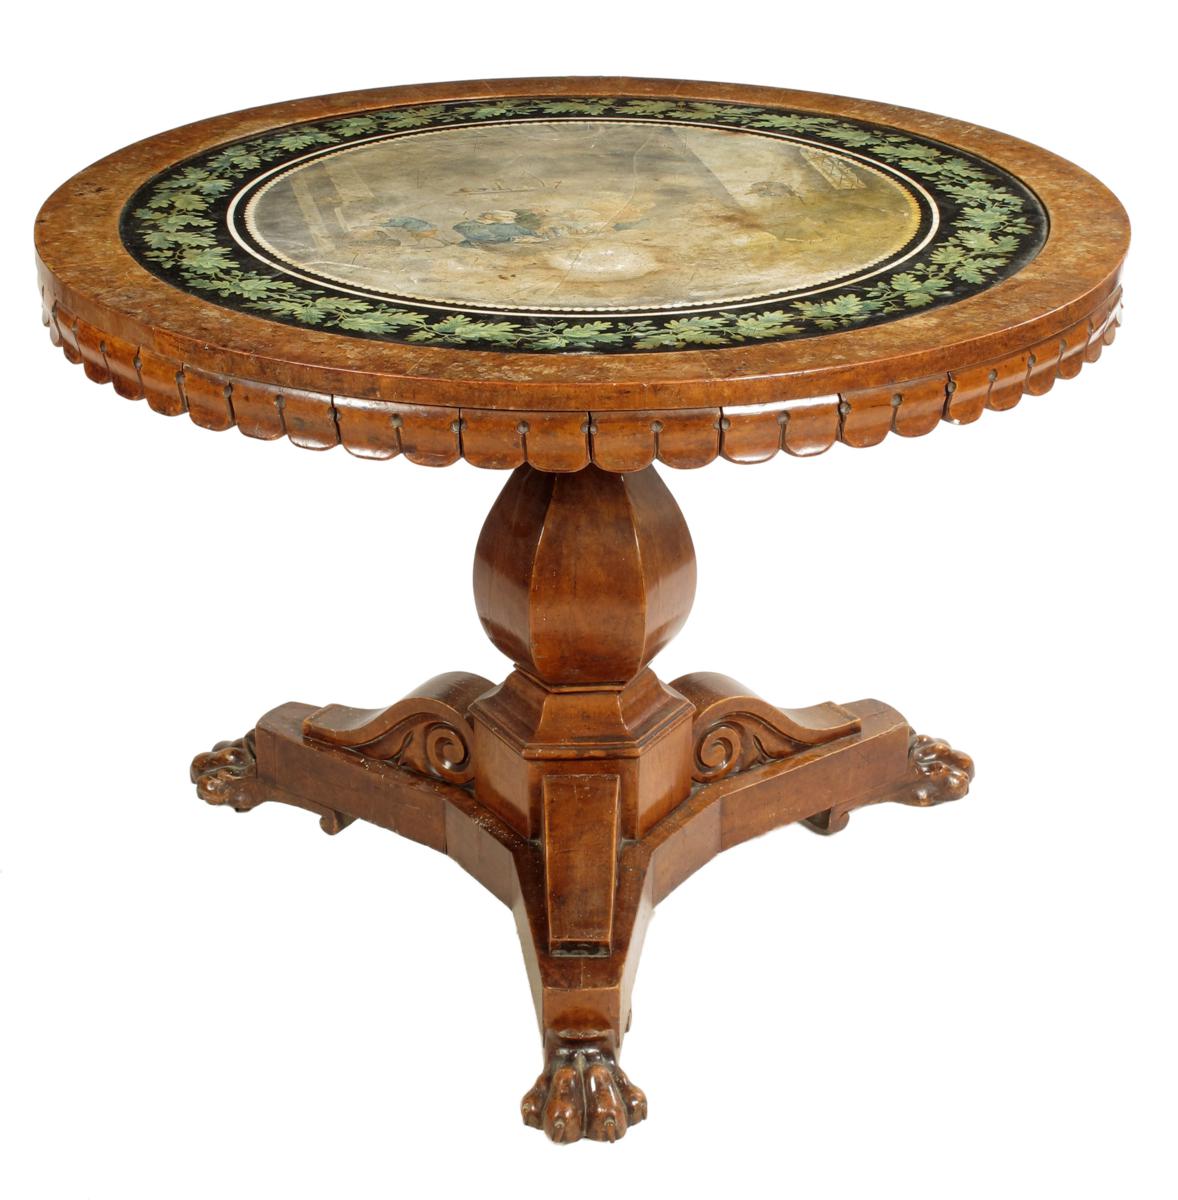 A Charles X burr maple centre table, the circular top inset an Italian scagliola panel depicting a